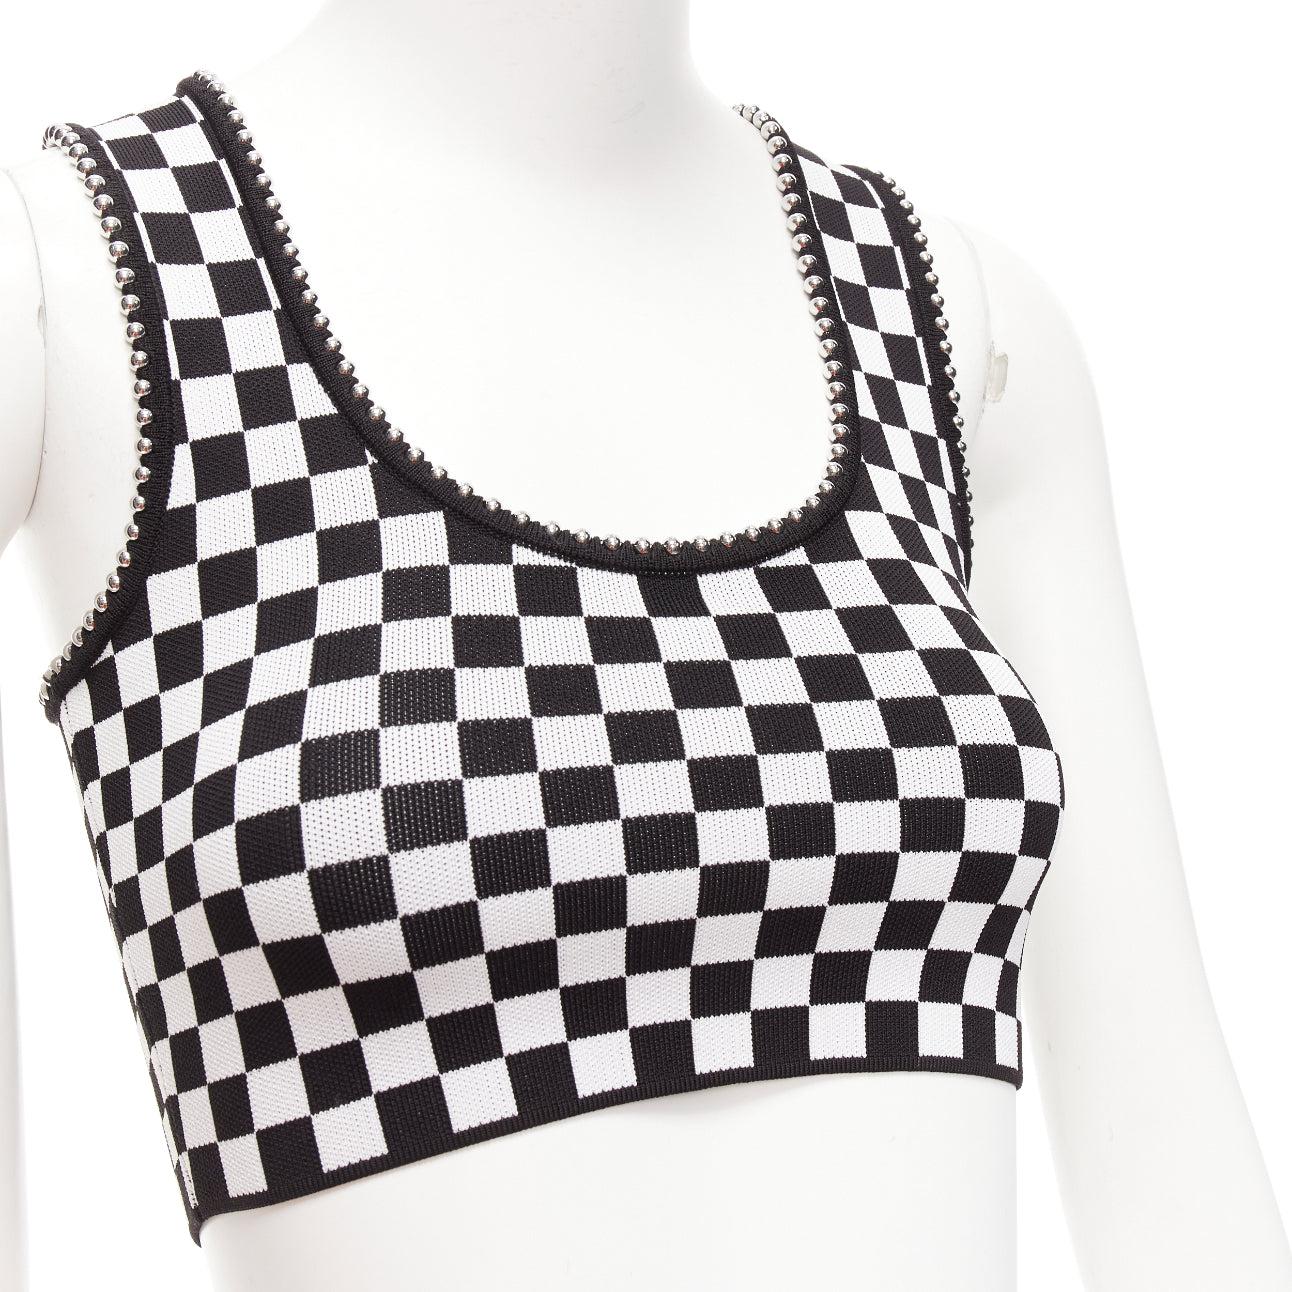 ALEXANDER WANG black white checker silver dome studded bralette top XS
Reference: YIKK/A00097
Brand: Alexander Wang
Designer: Alexander Wang
Material: Fabric
Color: Black, White
Pattern: Checkered
Closure: Slip On
Made in: